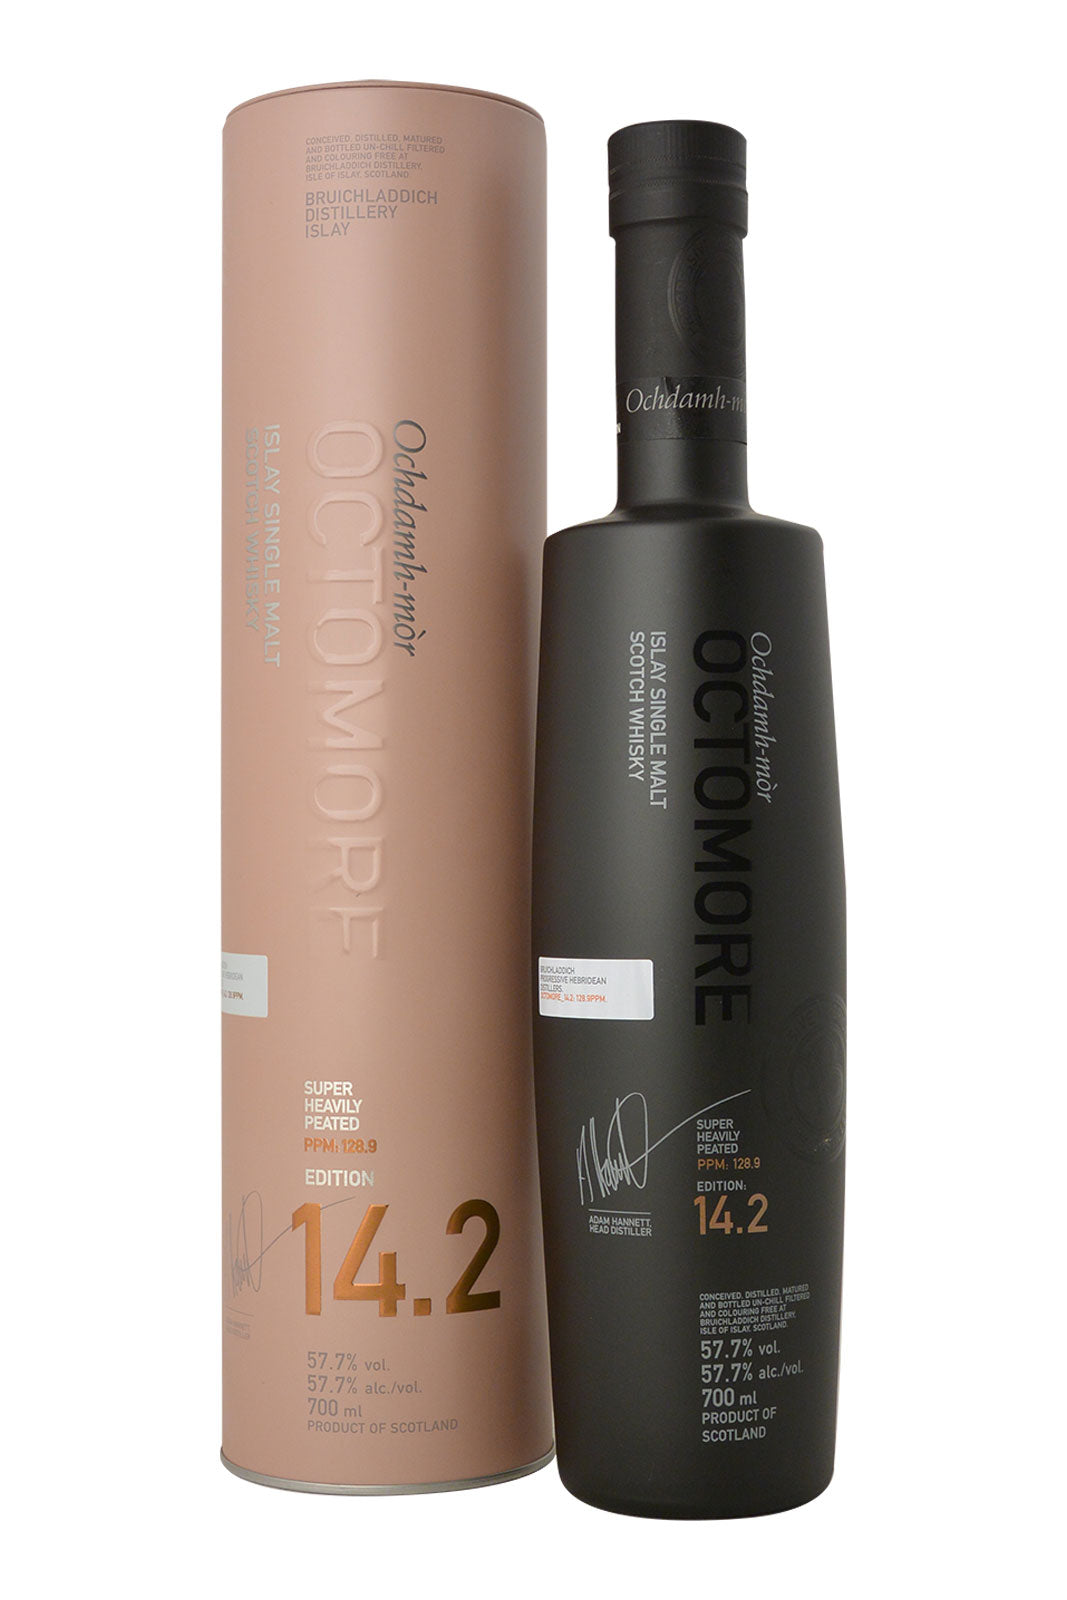 Octomore Edition 14.2 - 128.9 PPM